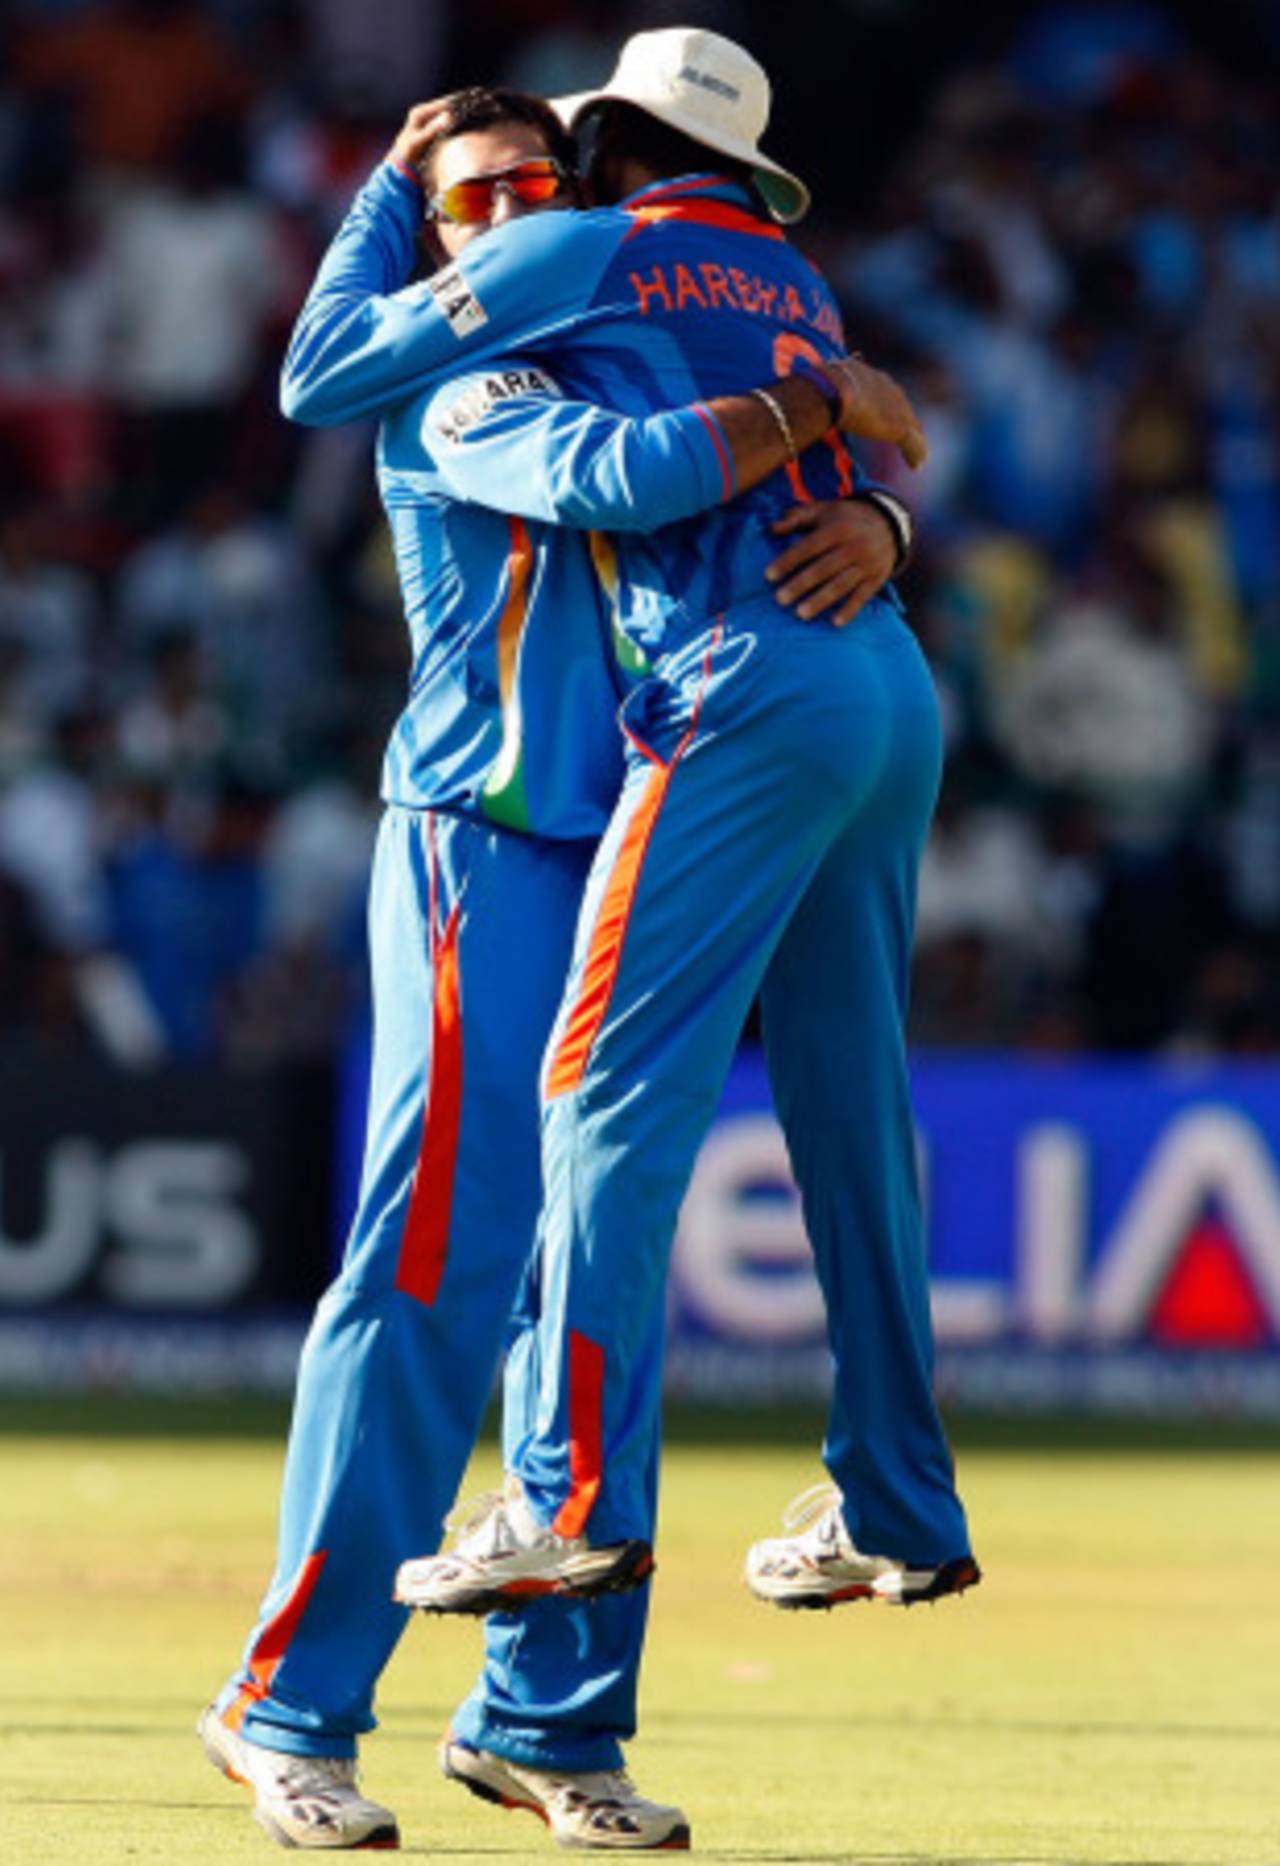 Harbhajan Singh embraces Yuvraj Singh after he got Kevin O'Brien, India v Ireland, Group B, World Cup 2011, Bangalore, March 6, 2011